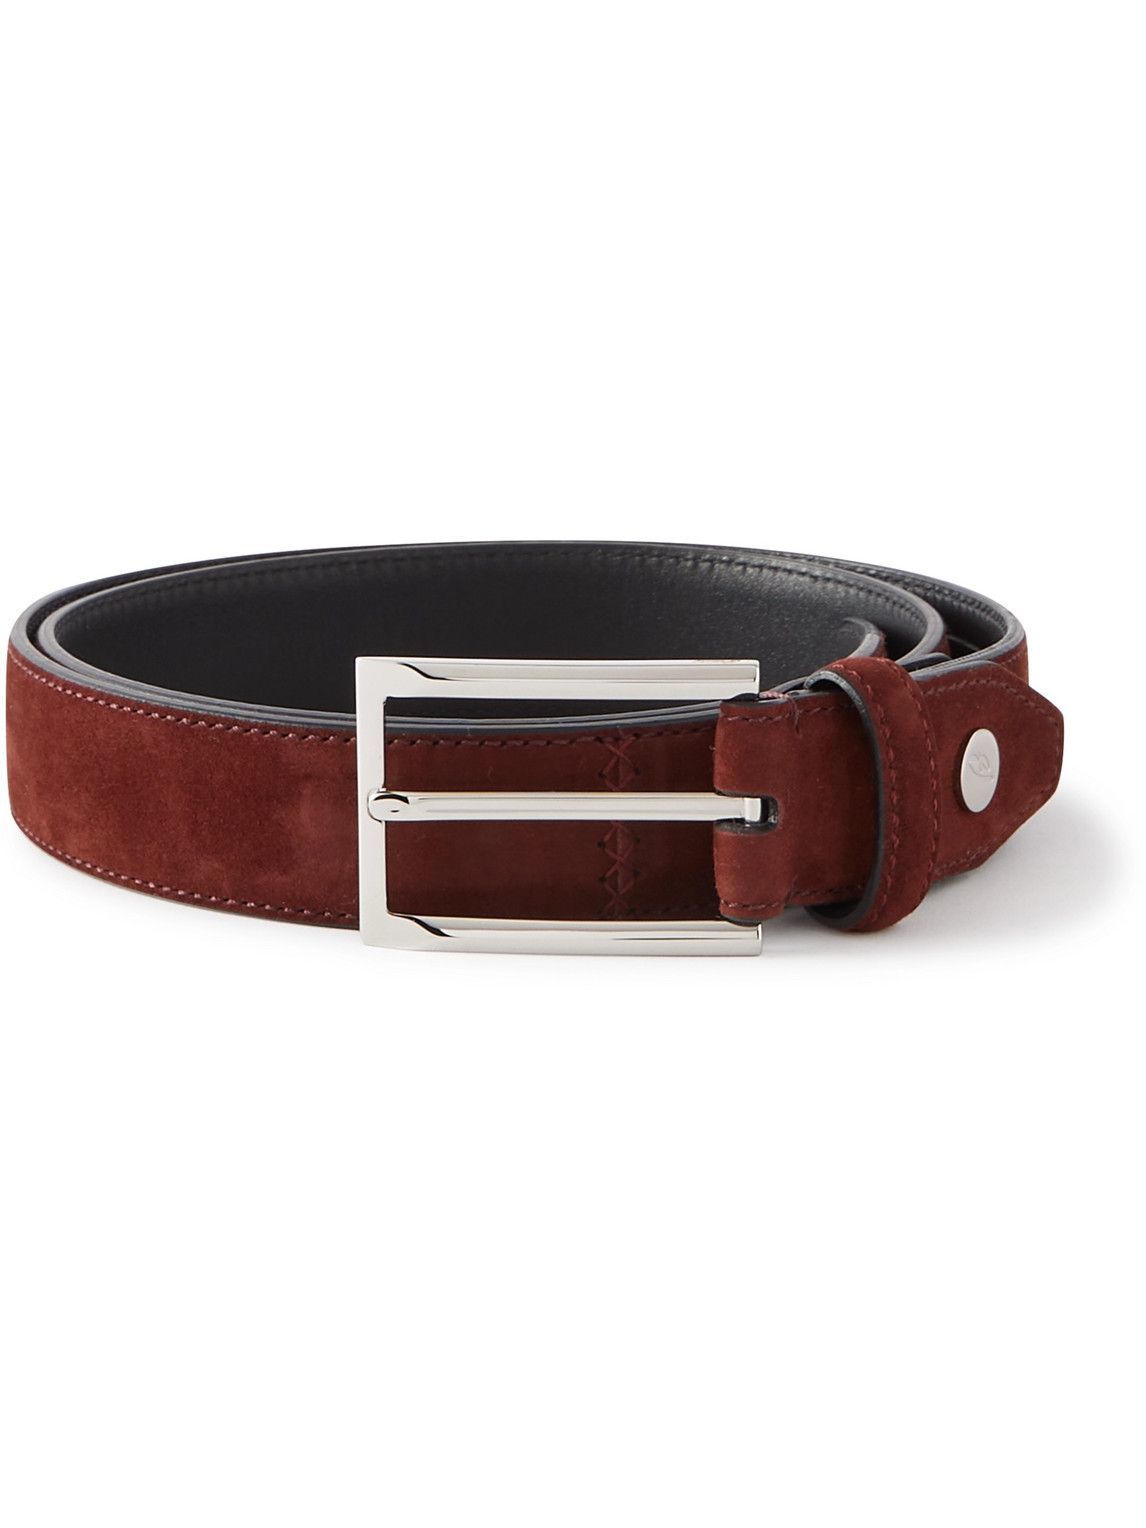 Brioni - 3cm Reversible Leather and Suede Belt - Brown Brioni